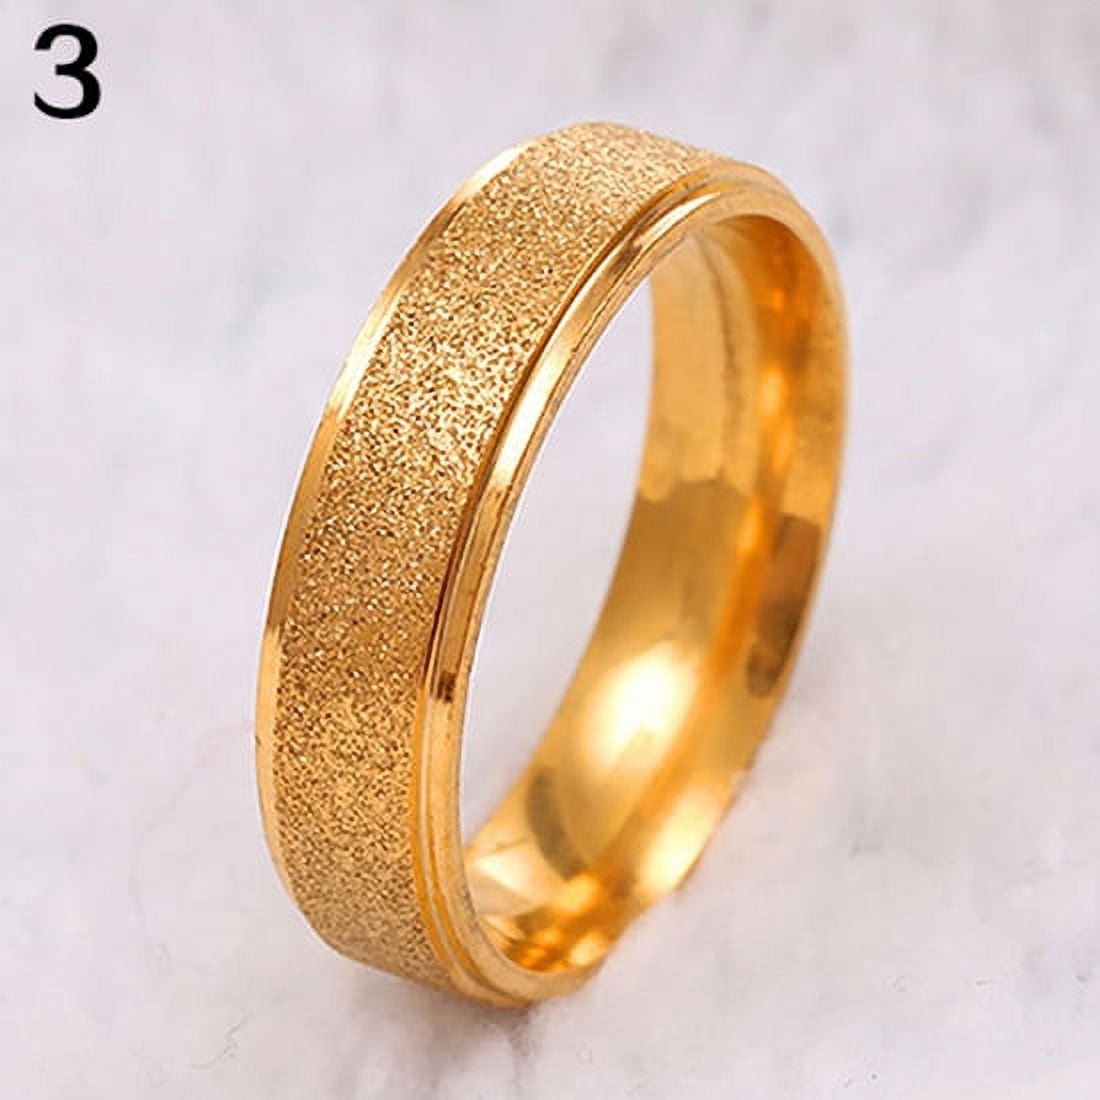 Buy Gold Rings 2 To 5 Grams Online - Stylish Gold Ring Designs For Men